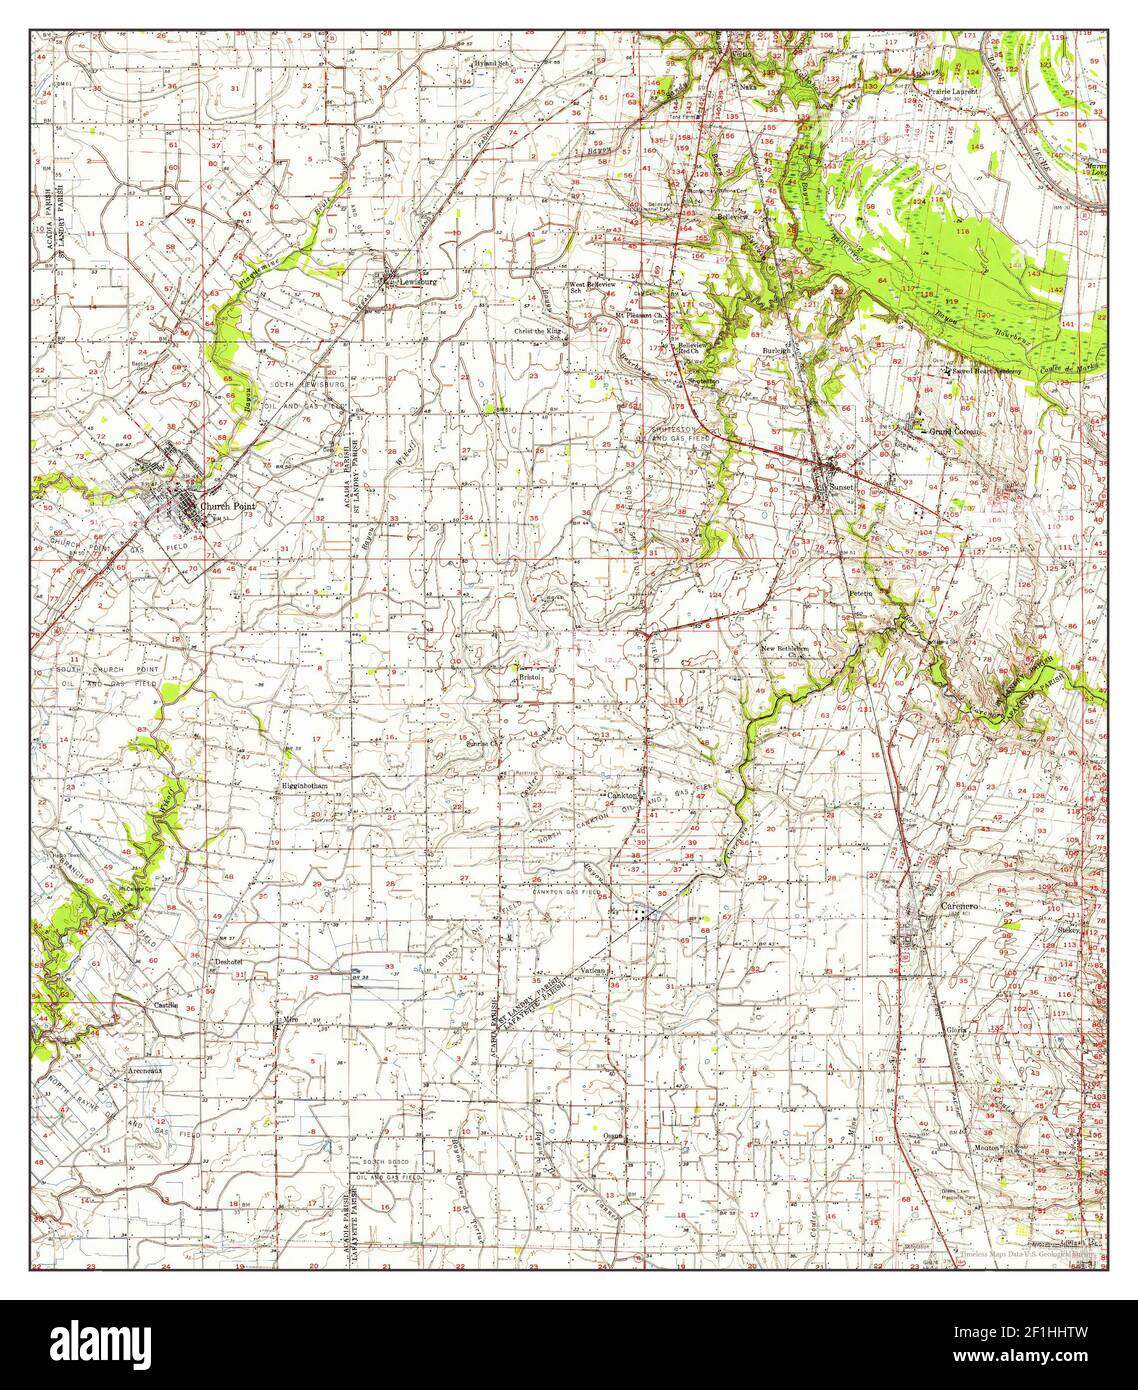 Carencro, Louisiana, map 1957, 1:62500, United States of America by Timeless Maps, data U.S. Geological Survey Stock Photo